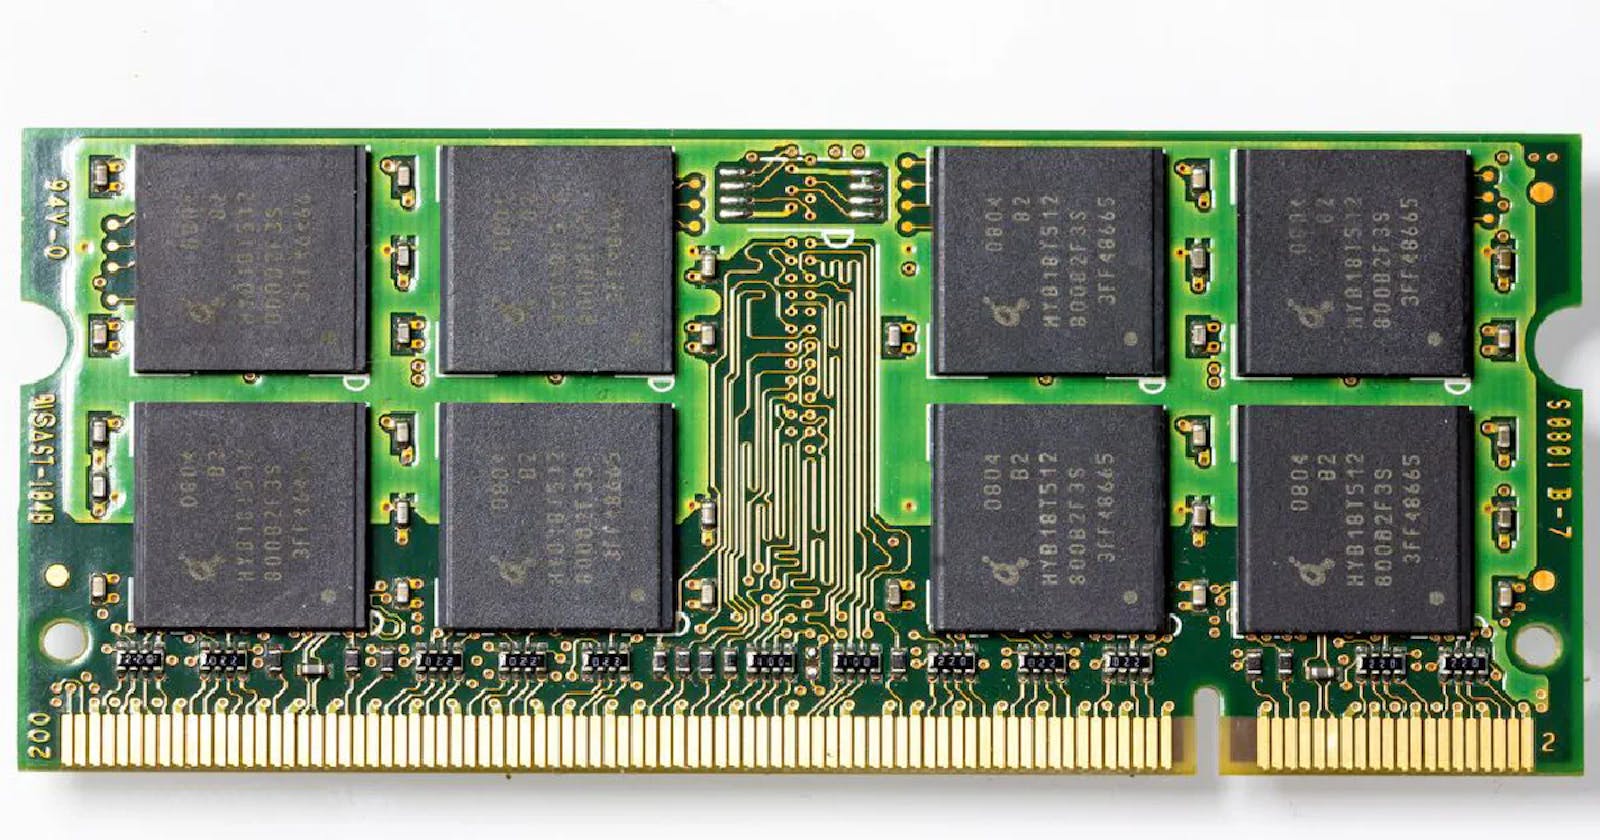 Securing Systems: The Pivotal Role of ECC Memory Against Data Corruption